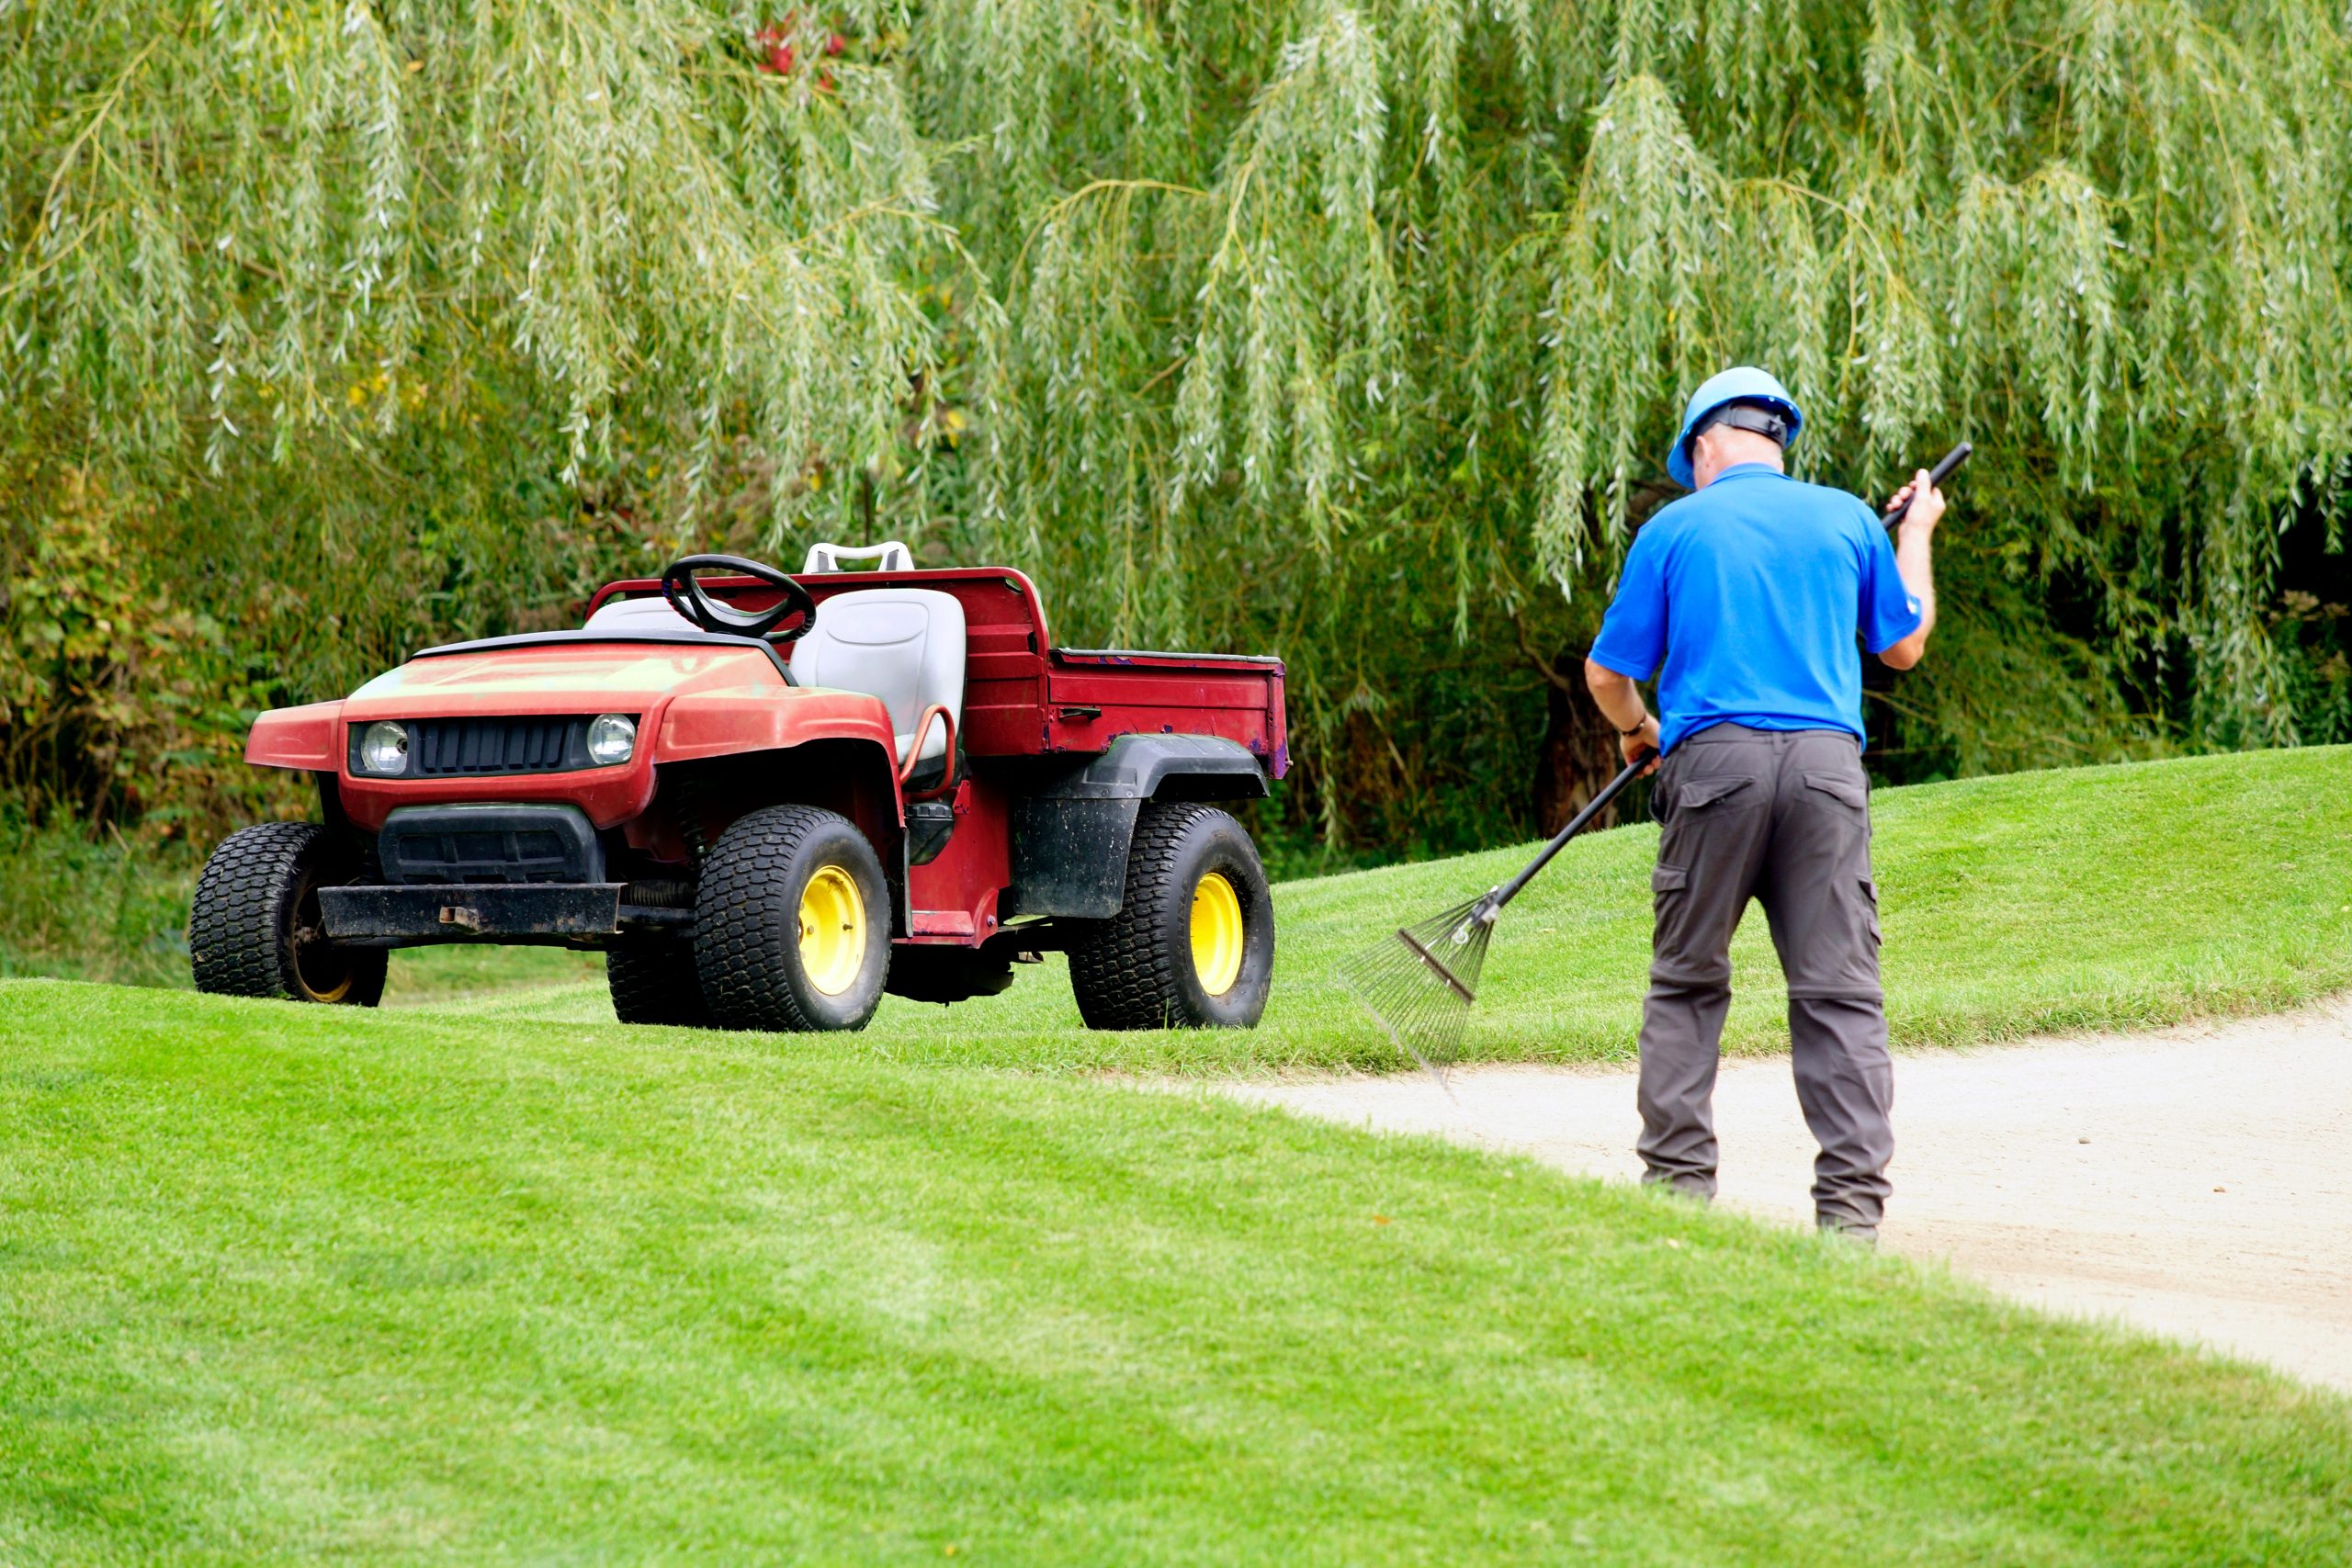 Golf groundskeeper at work on golf course